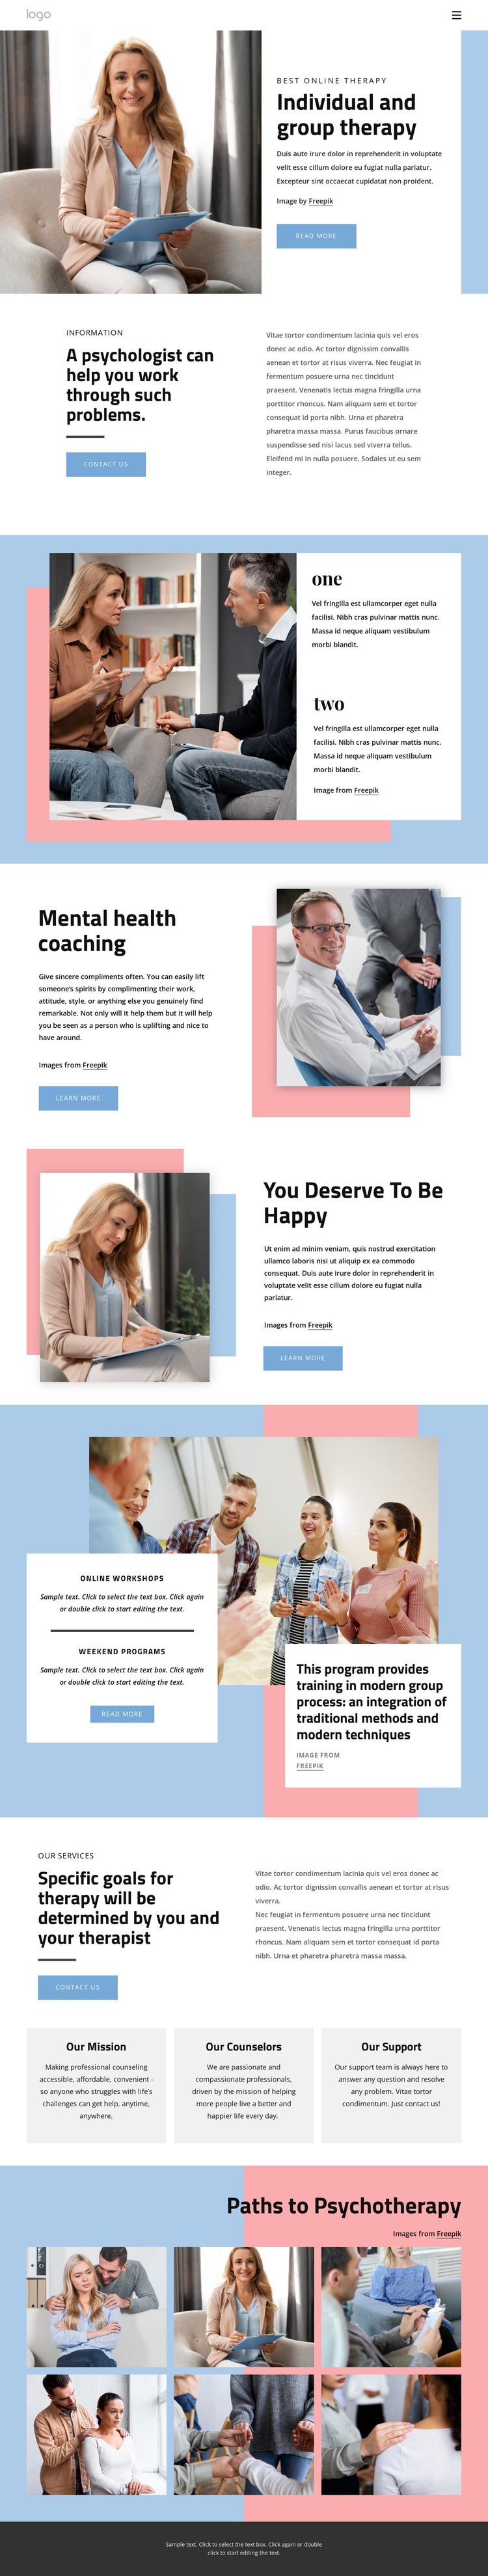 Undividual and group therapy Homepage Design